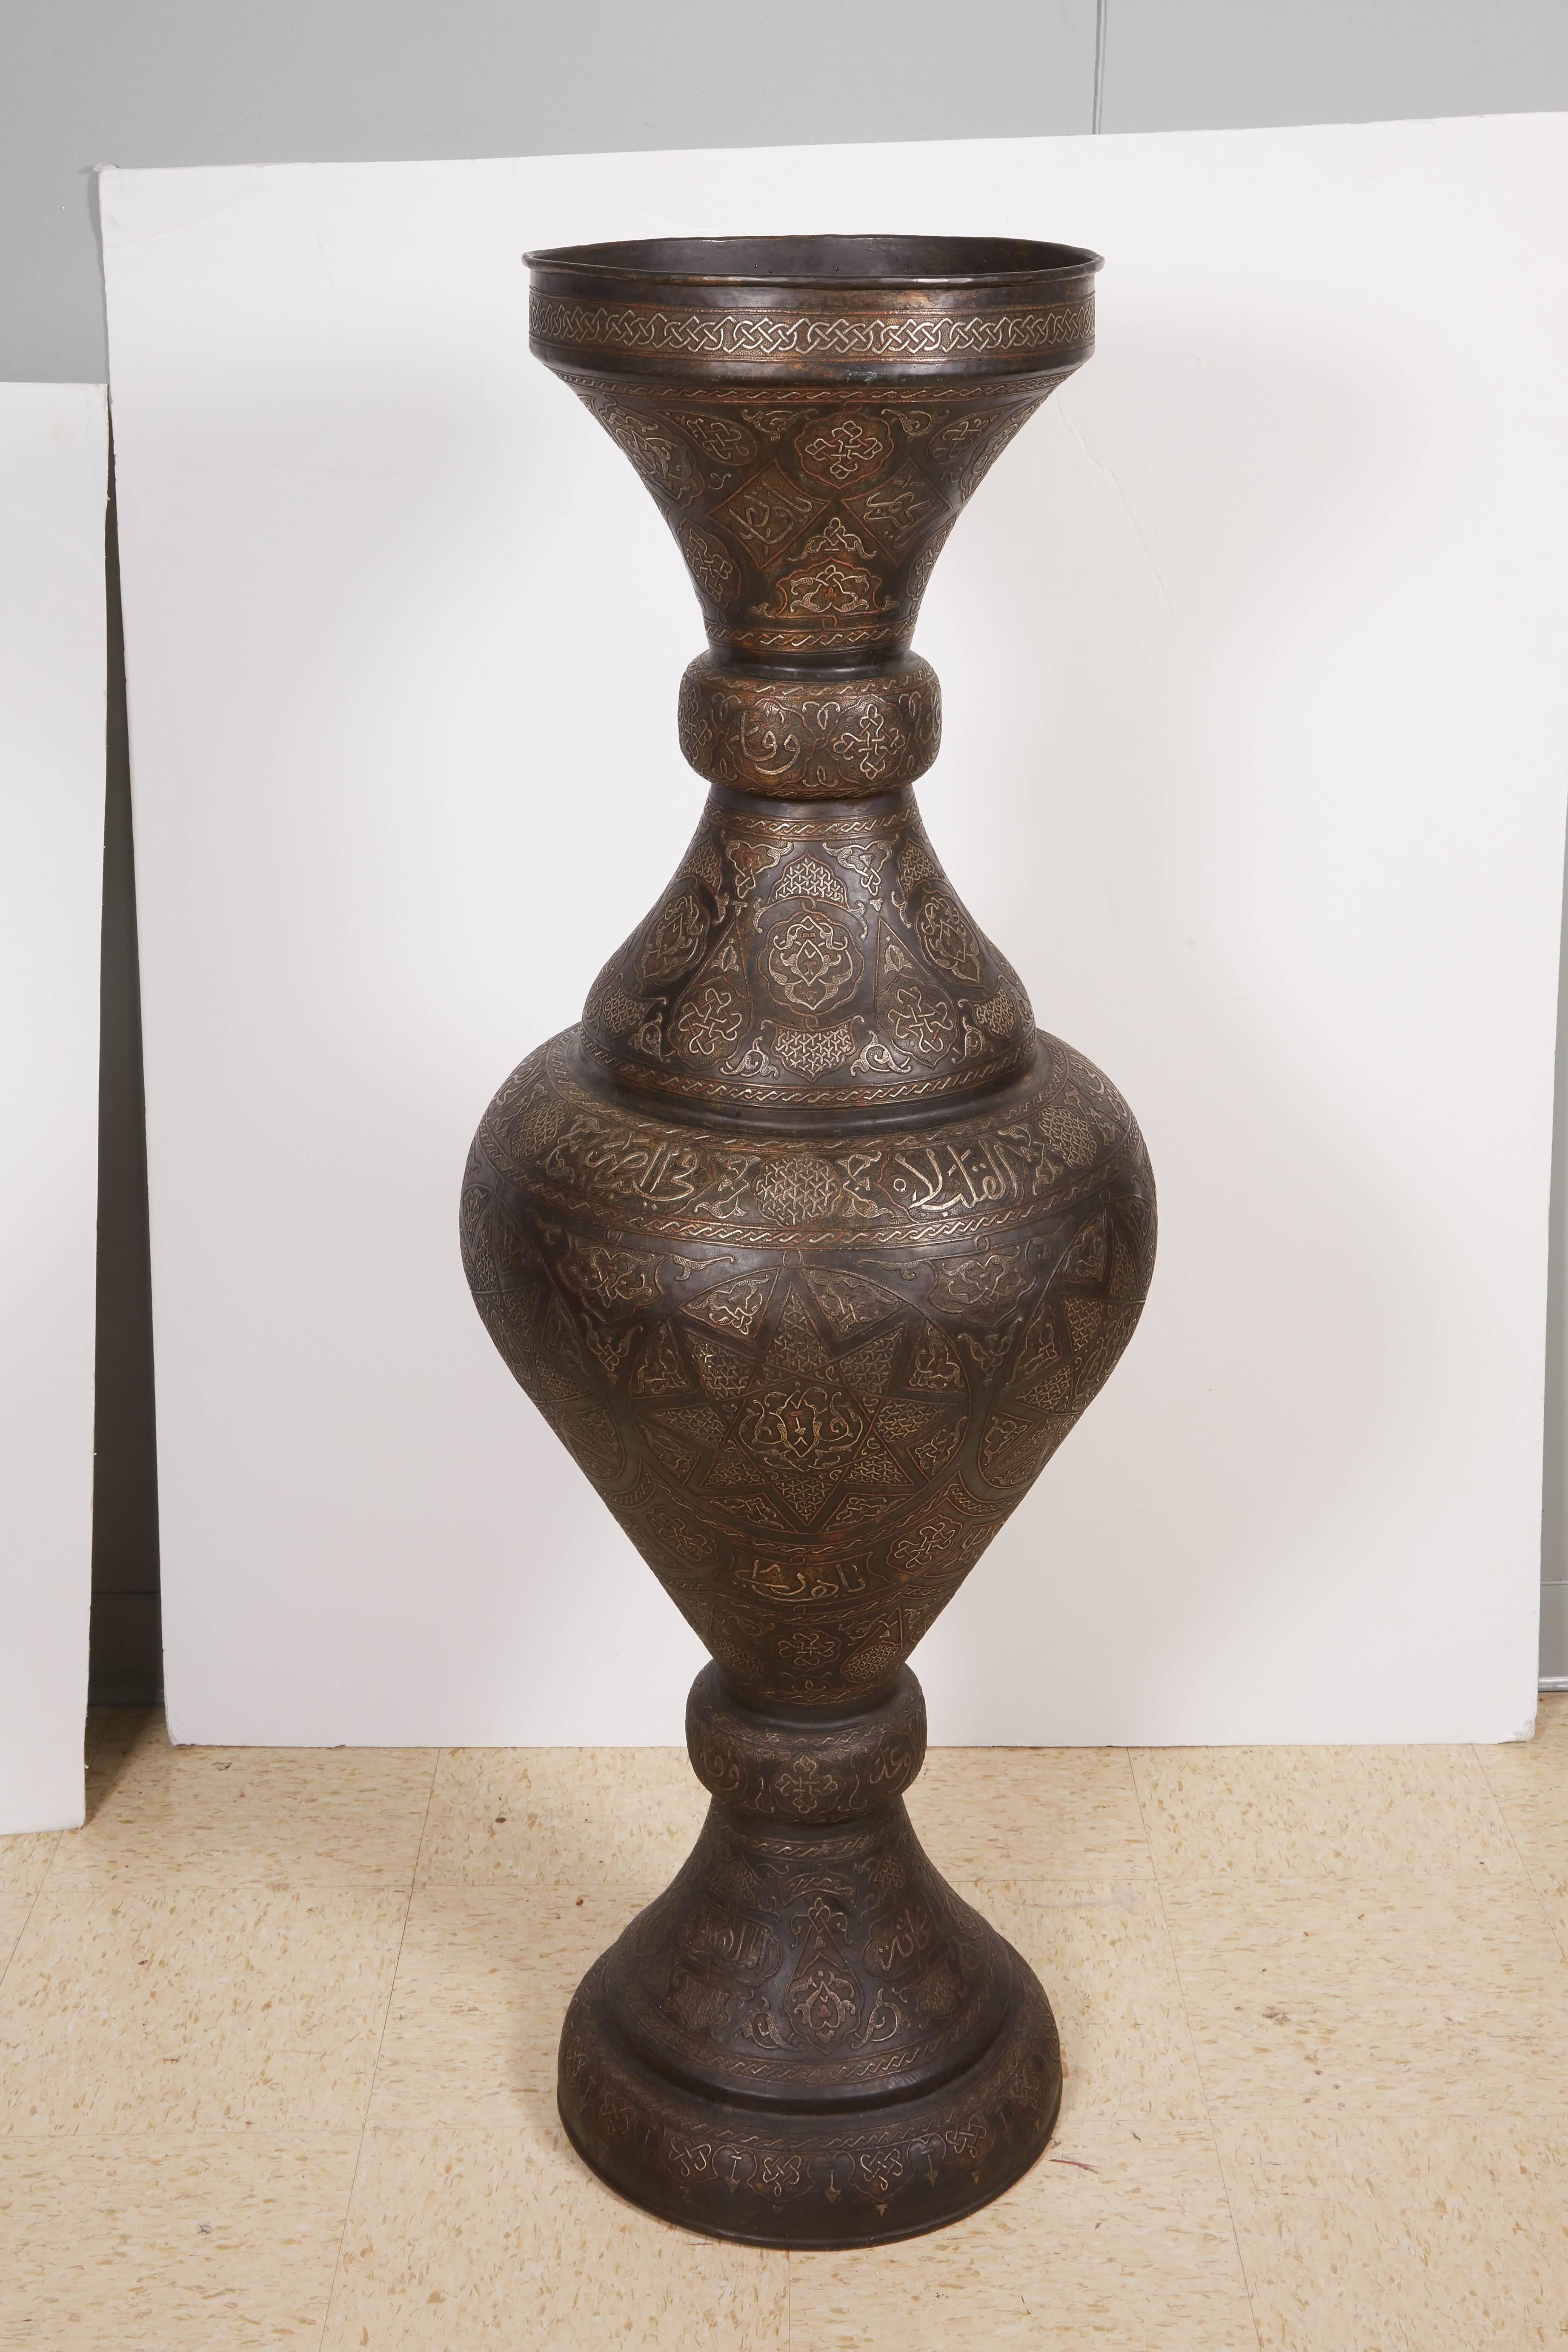 Monumental pair of Islamic silver inlaid bronze palace vases with Arabic calligraphy throughout,
 
High quality vases, very good design. Will go very well in an Islamic / Moroccan room.

Very good condition, Ready to place.

Measure: 52